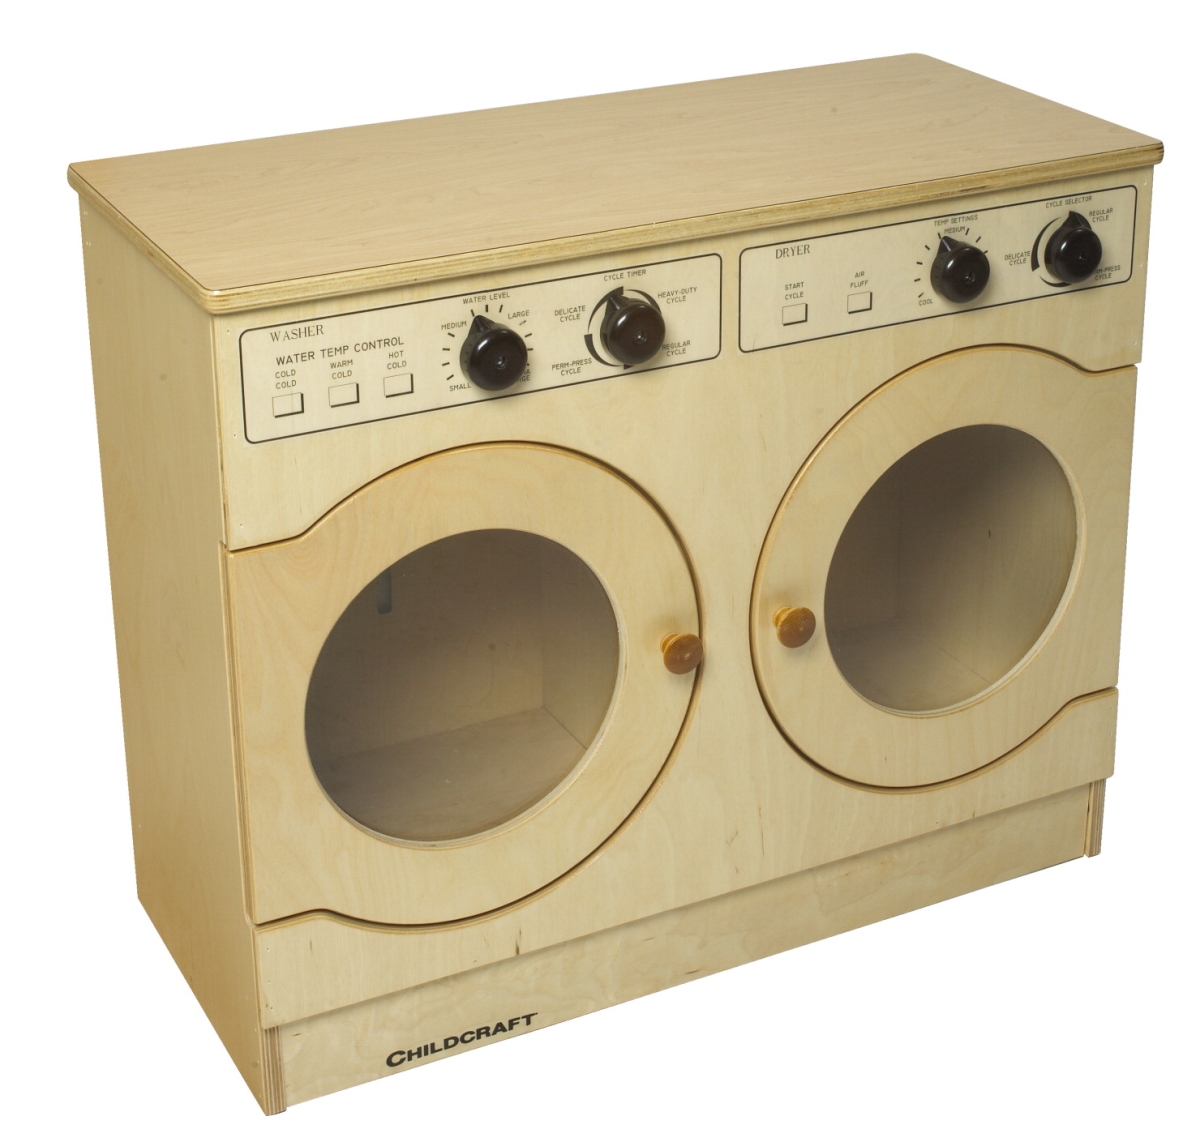 1528677 29.5 X 13.37 X 24.37 In. Modern Washer & Dryer Combo